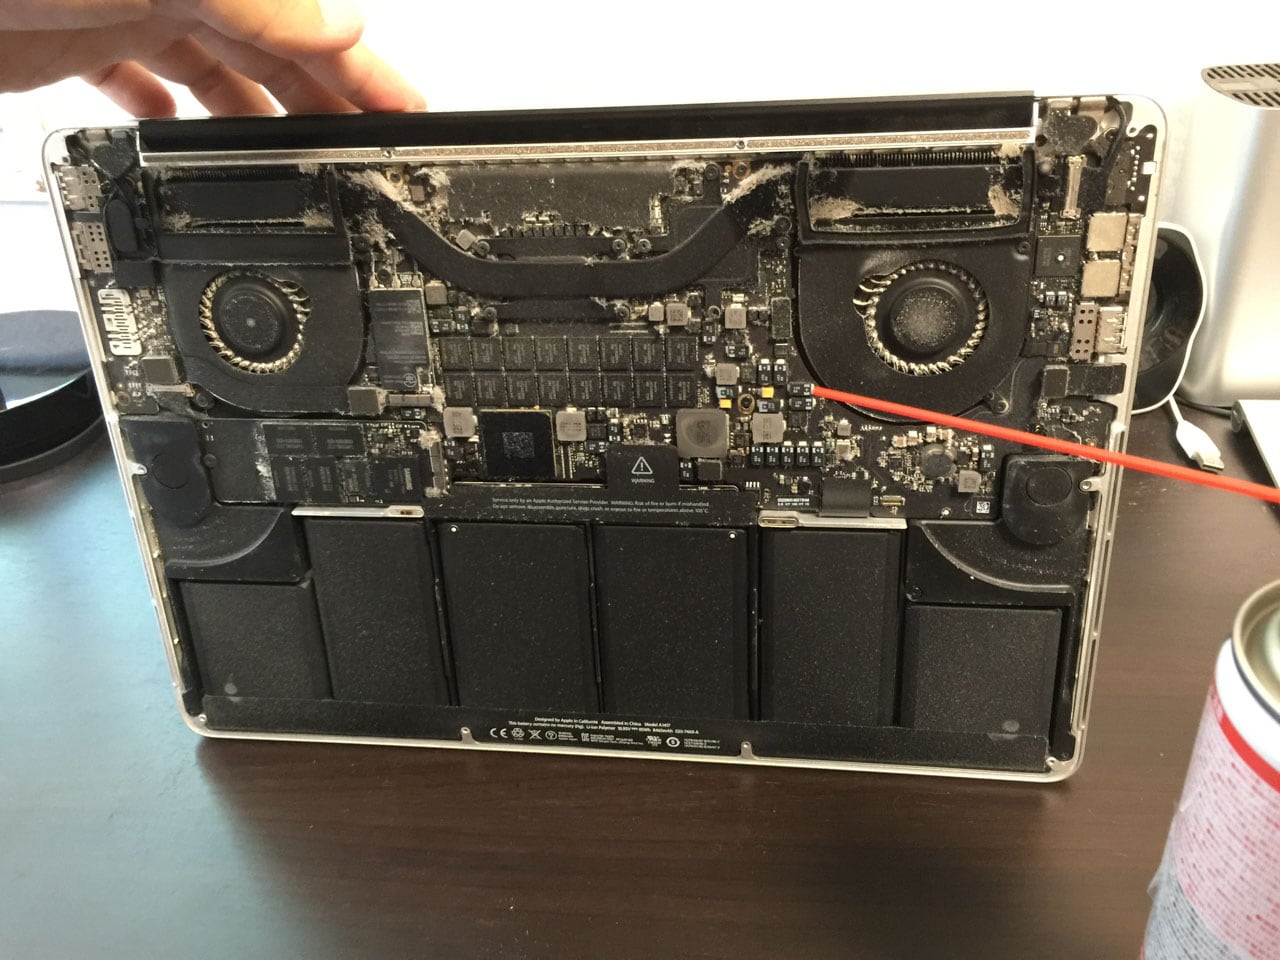 Mbp cleaning 5